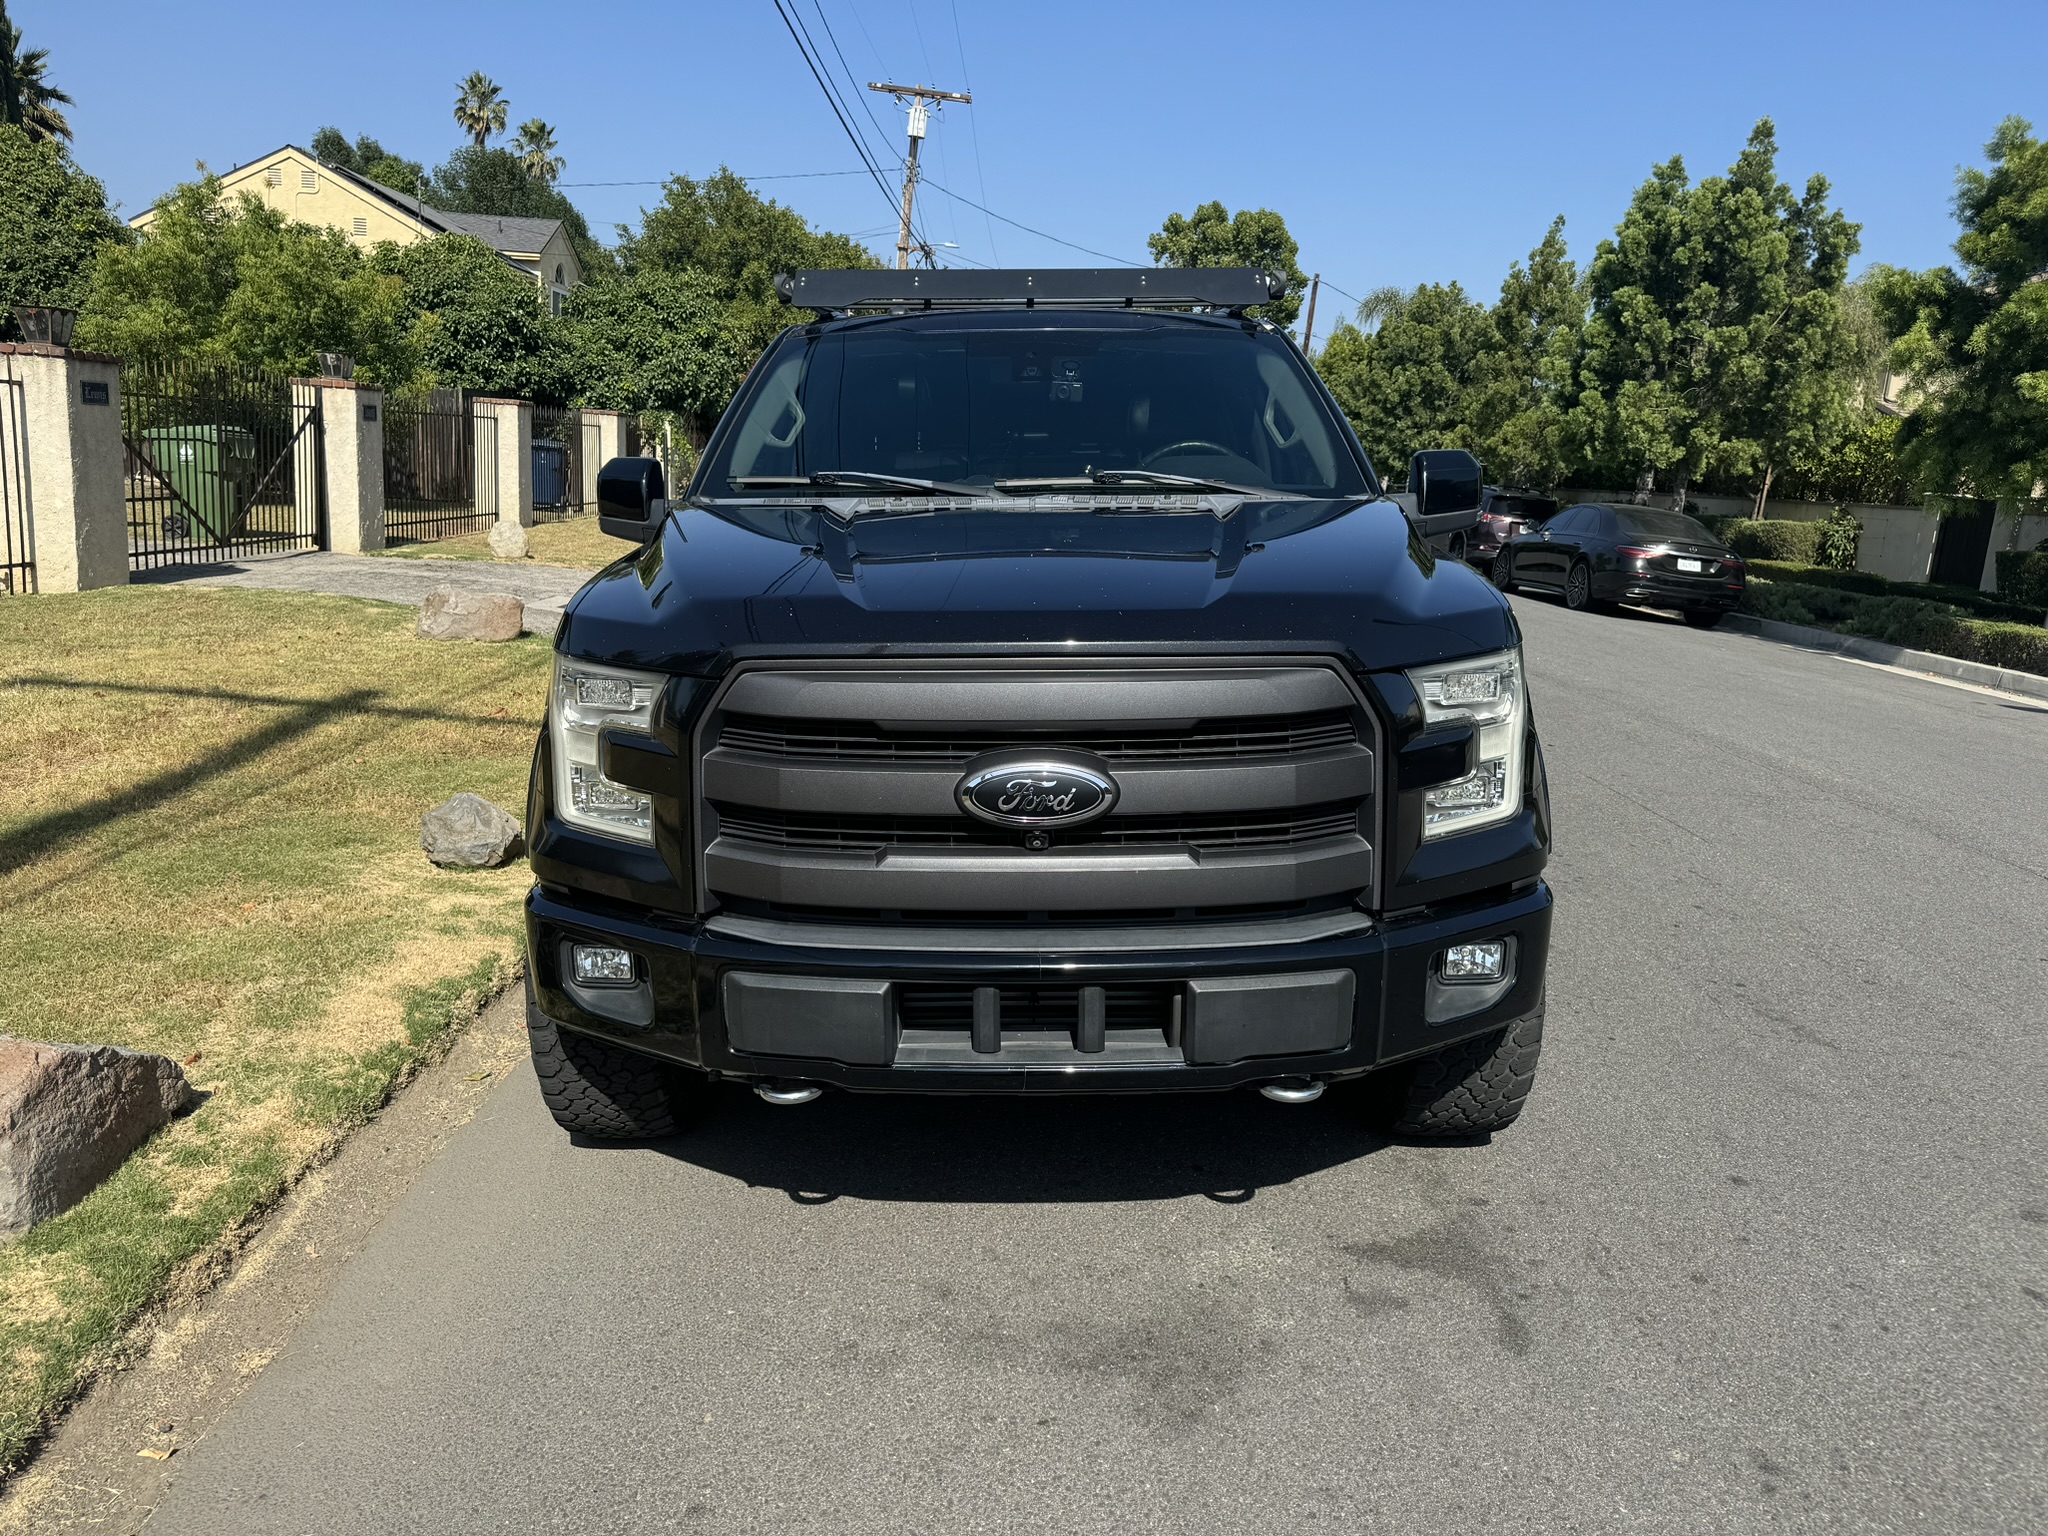 Used Ford F-150 Trucks for Sale Near North Hills